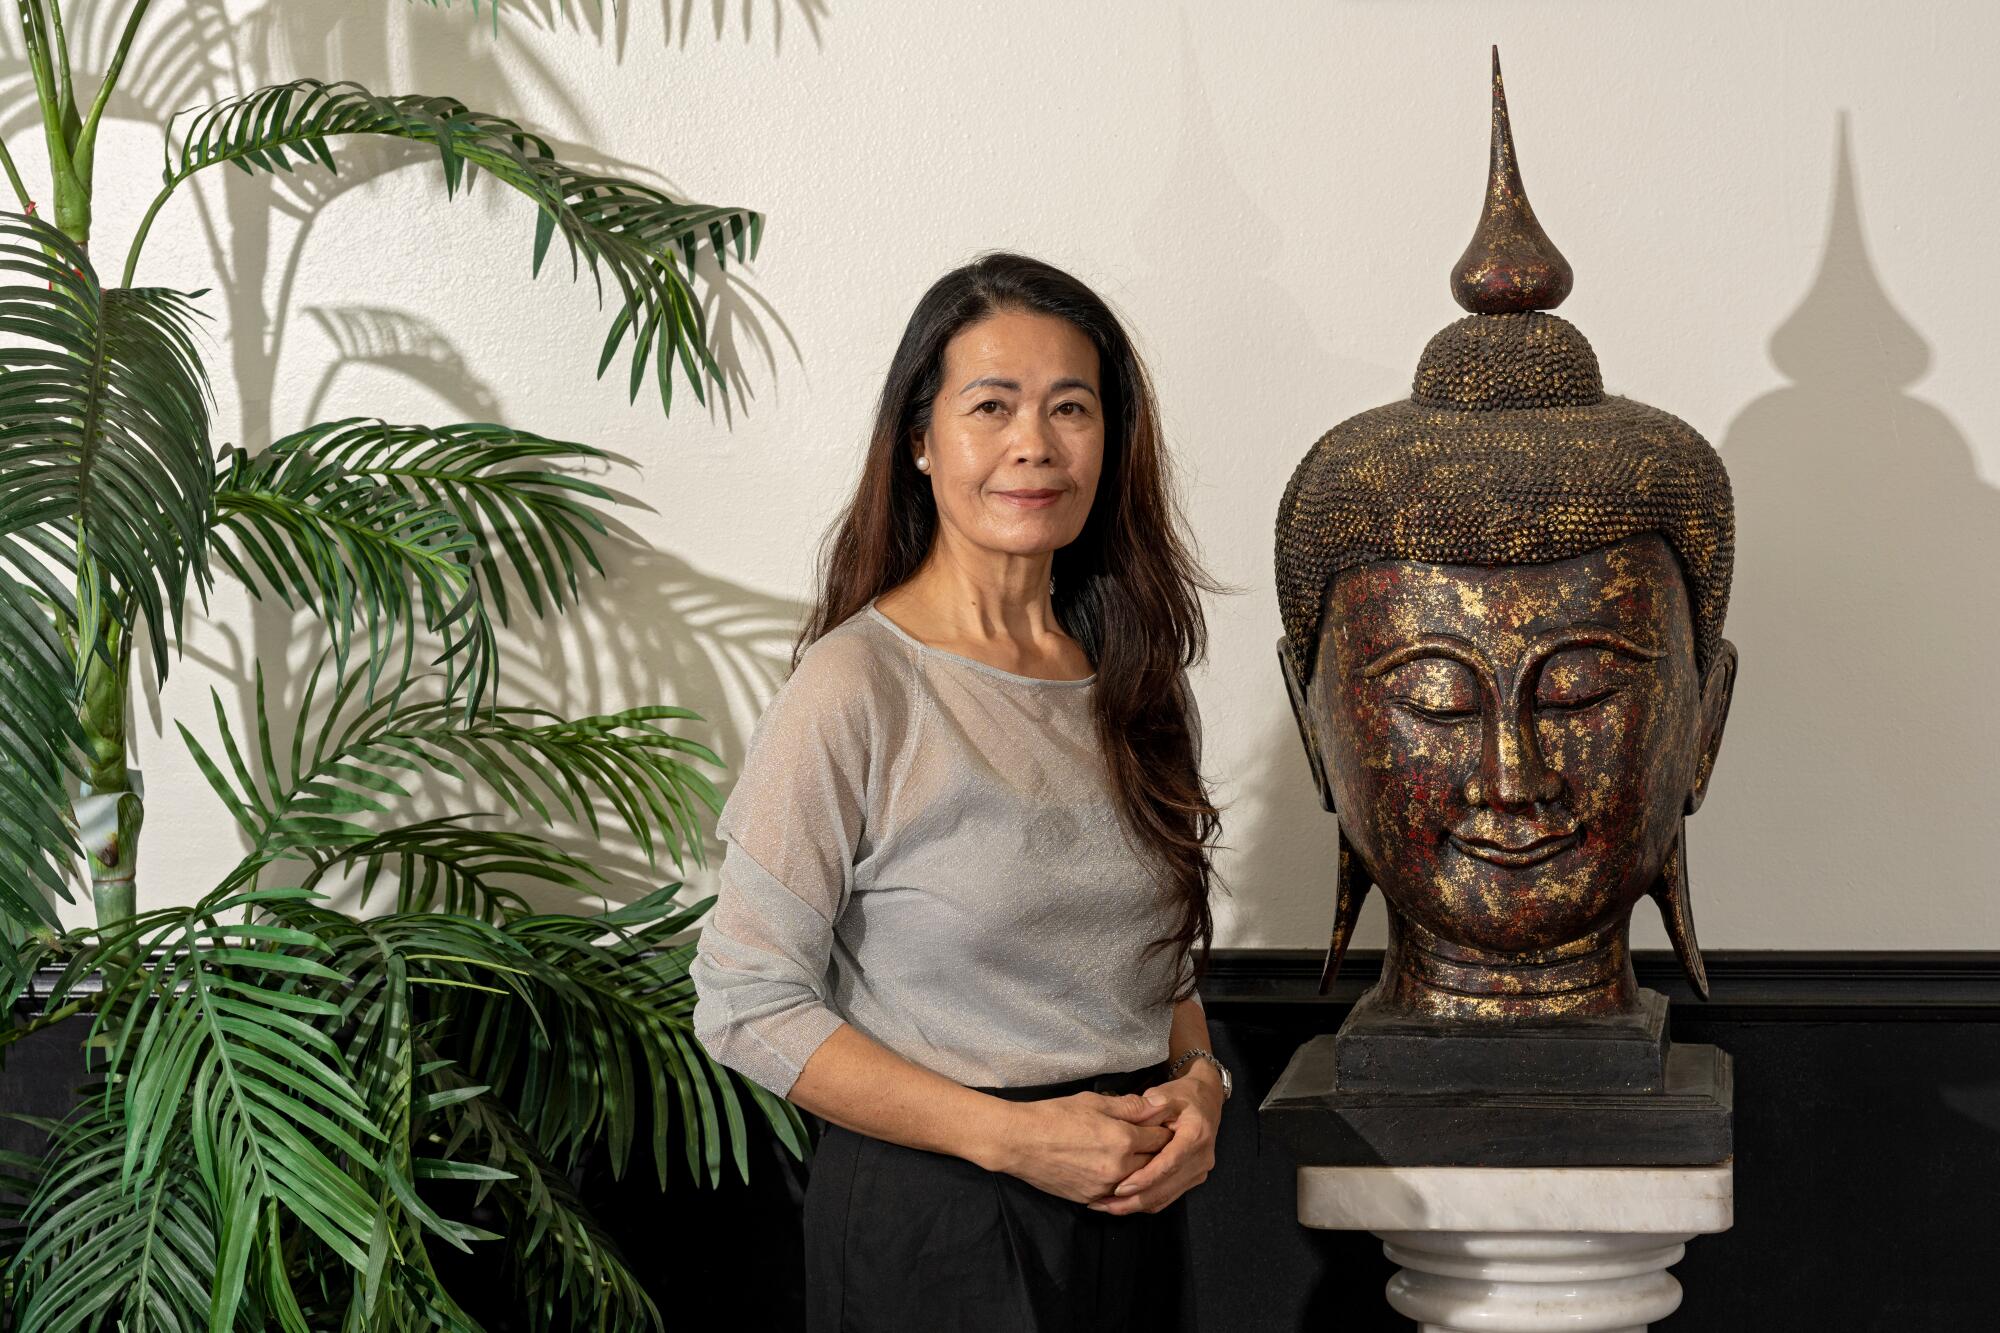 A woman stands next to a large metal Buddha head and a potted palm.